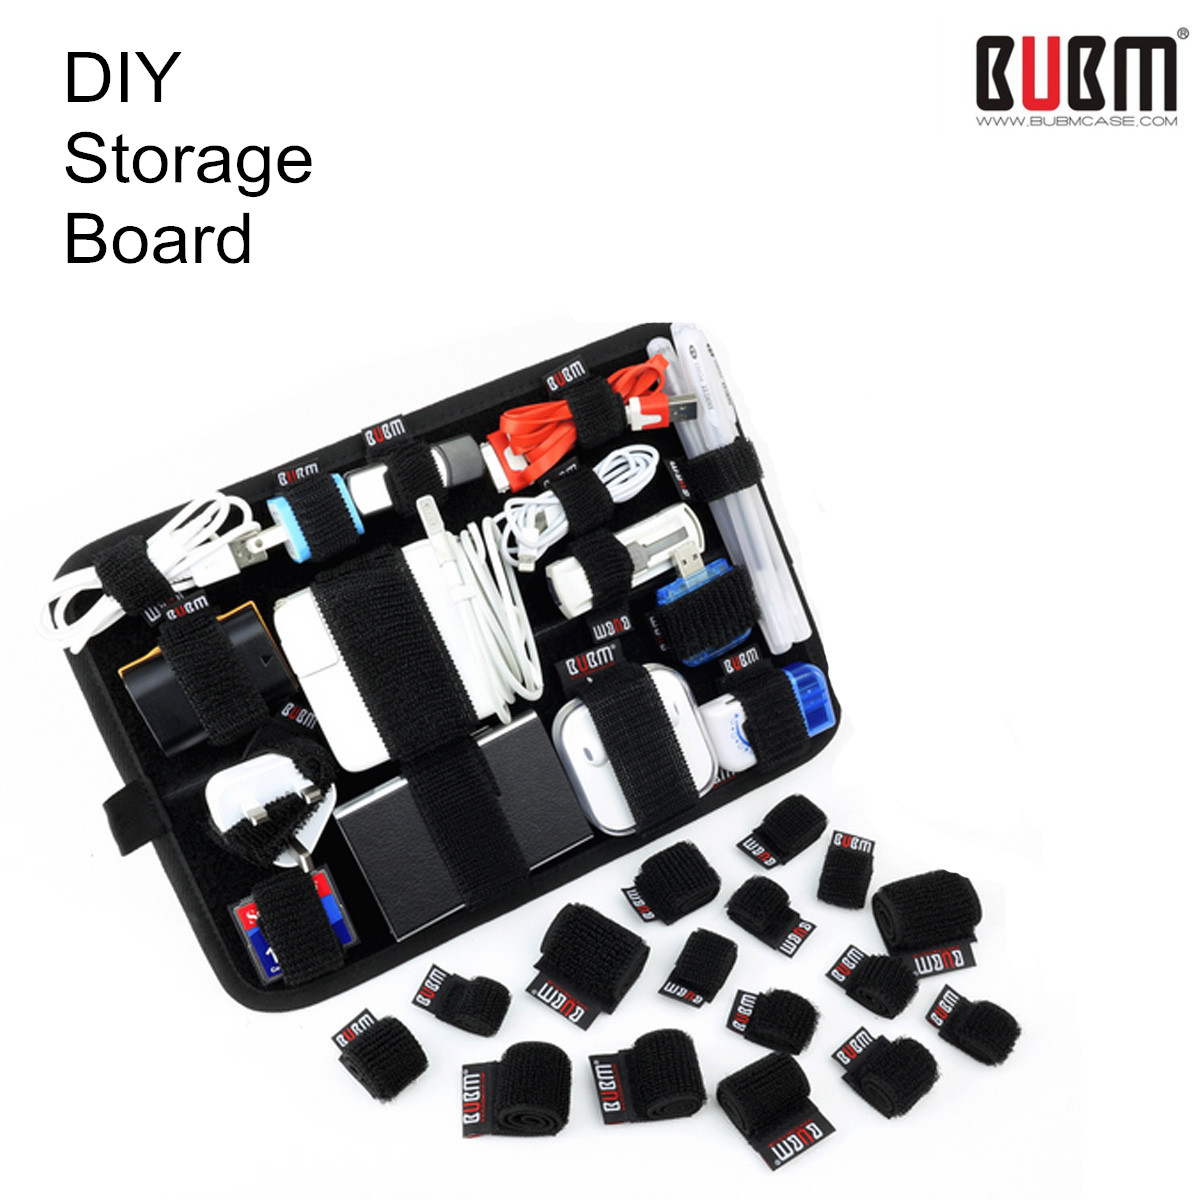 BUBM-Storage-Board-M-Size-Nylon-Two-sided-DIY-Storage-Bag-for-Cable-Charger-1972812-7